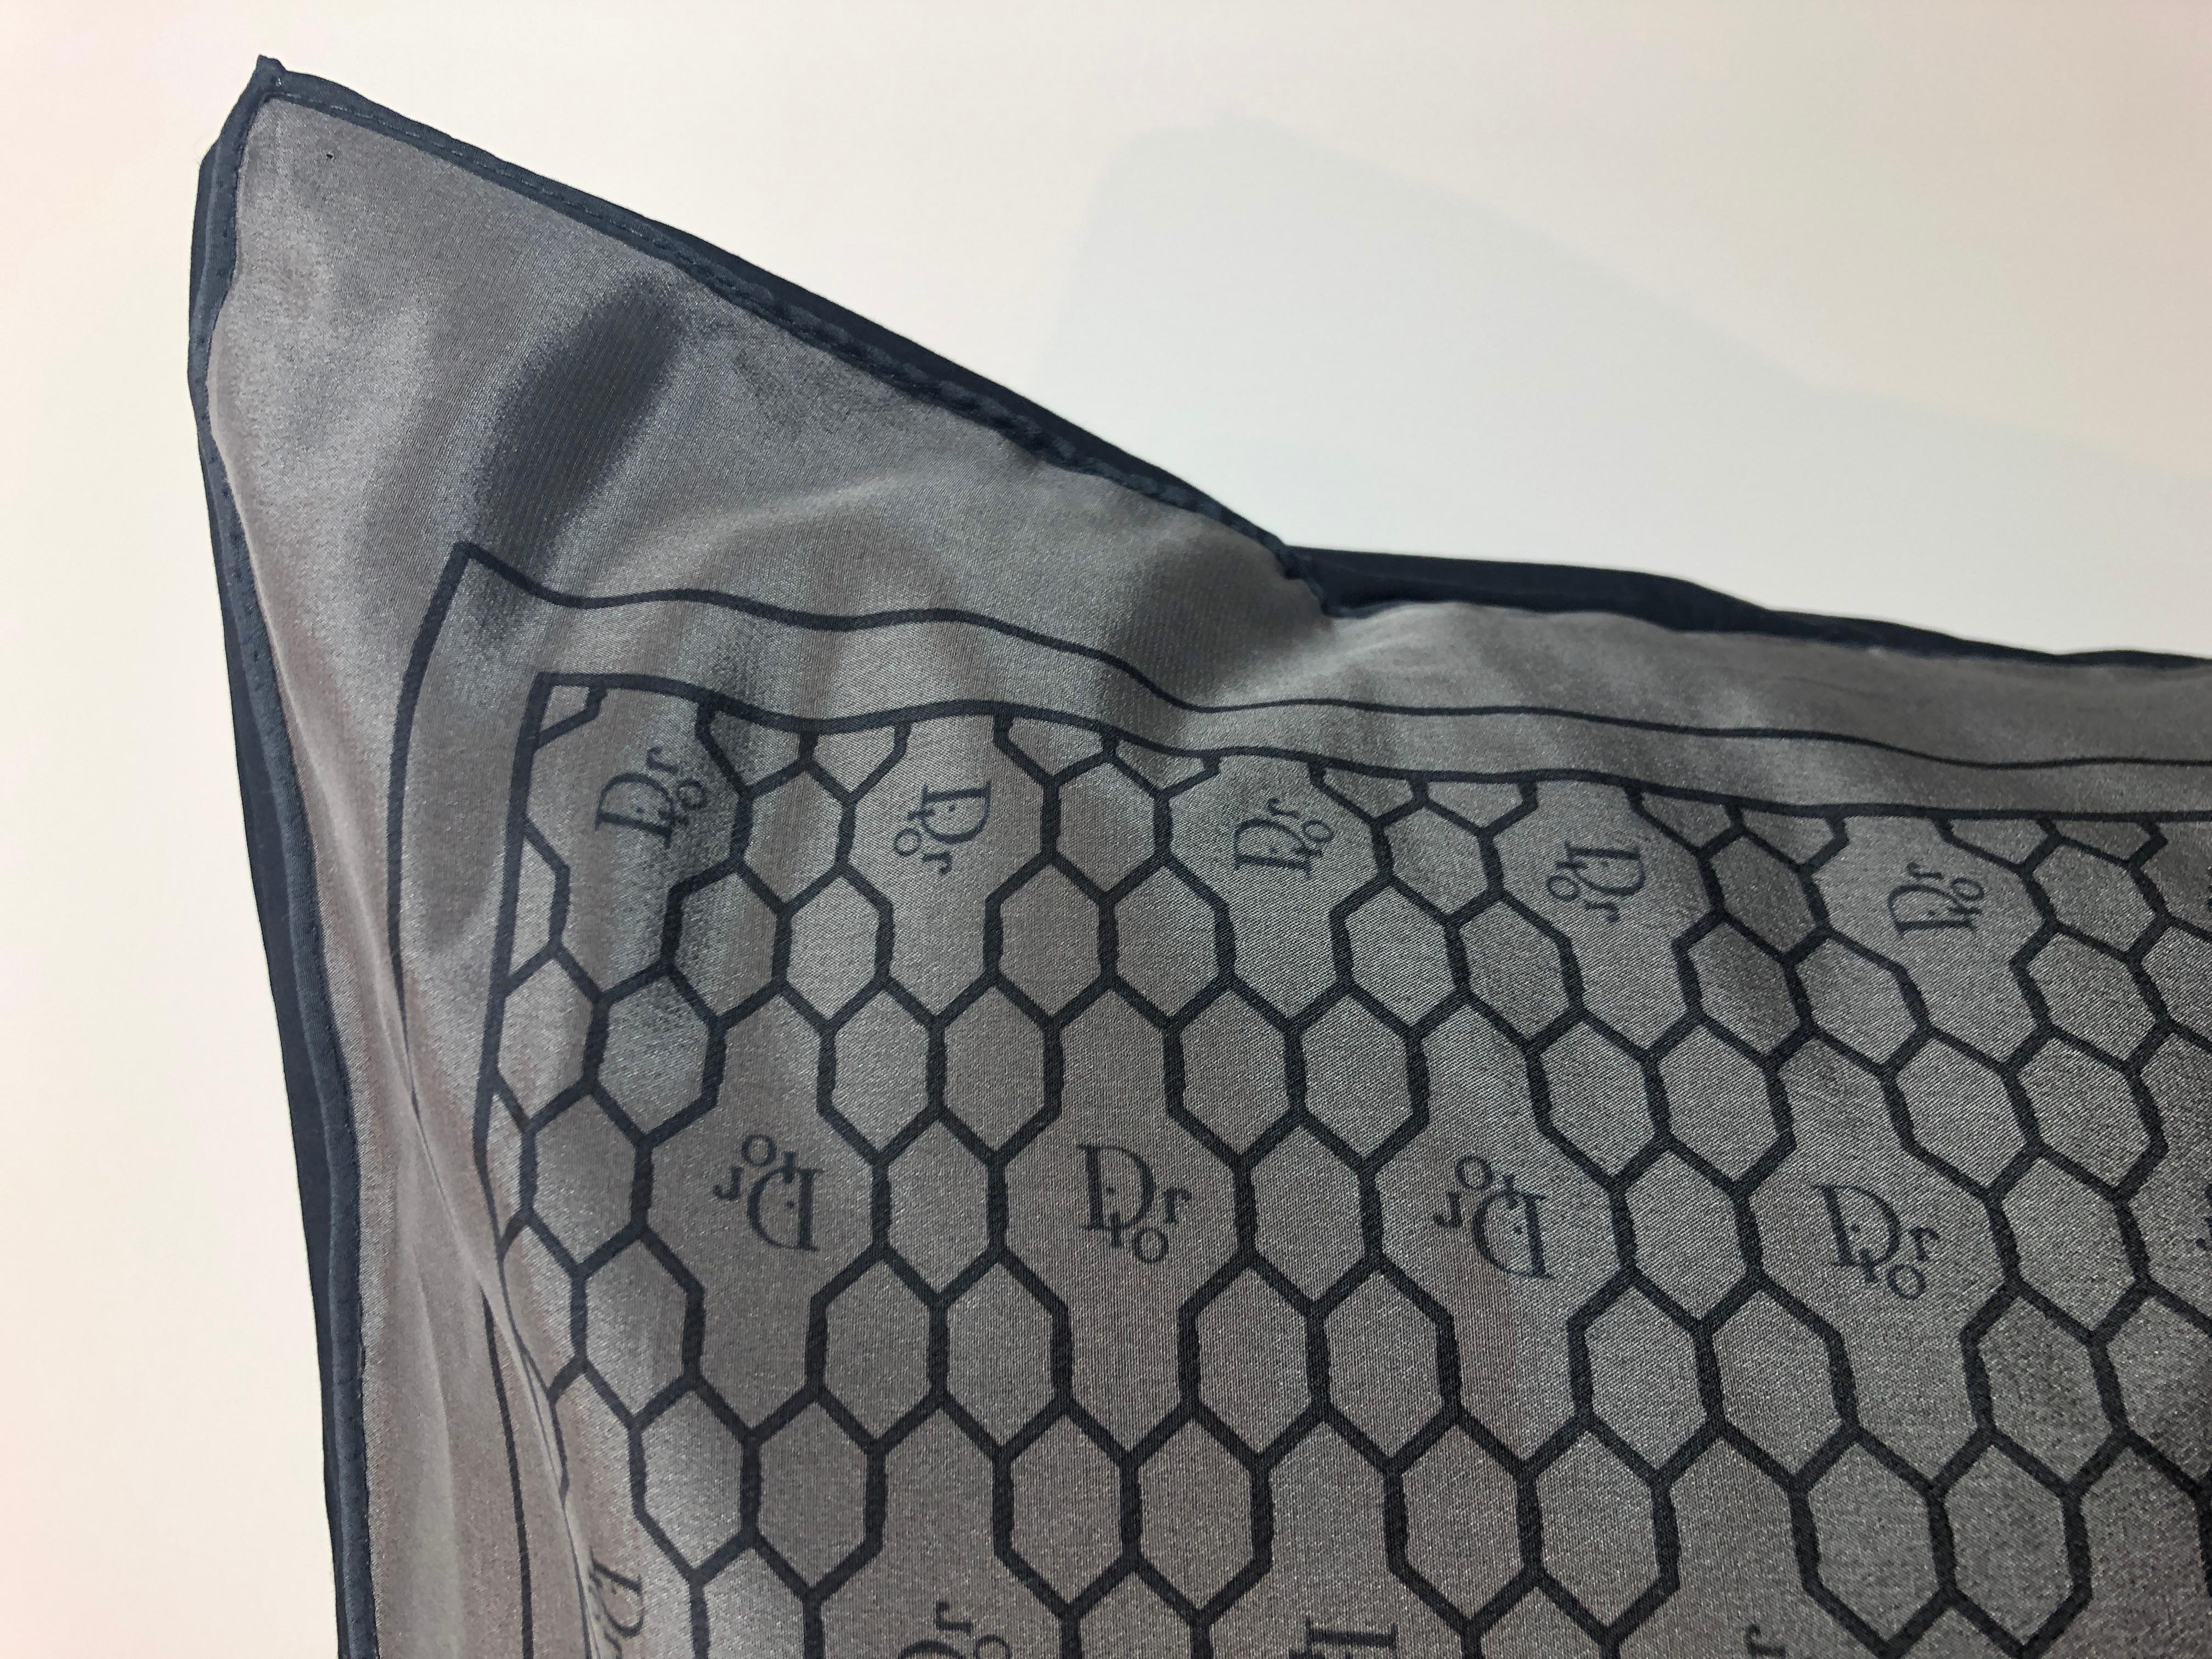 Offered is a Mid-Century Modern signed retro black and gray beehive pattern logo silk scarf with backing in black cotton percale and poly fill insert decorative pillow. The word 